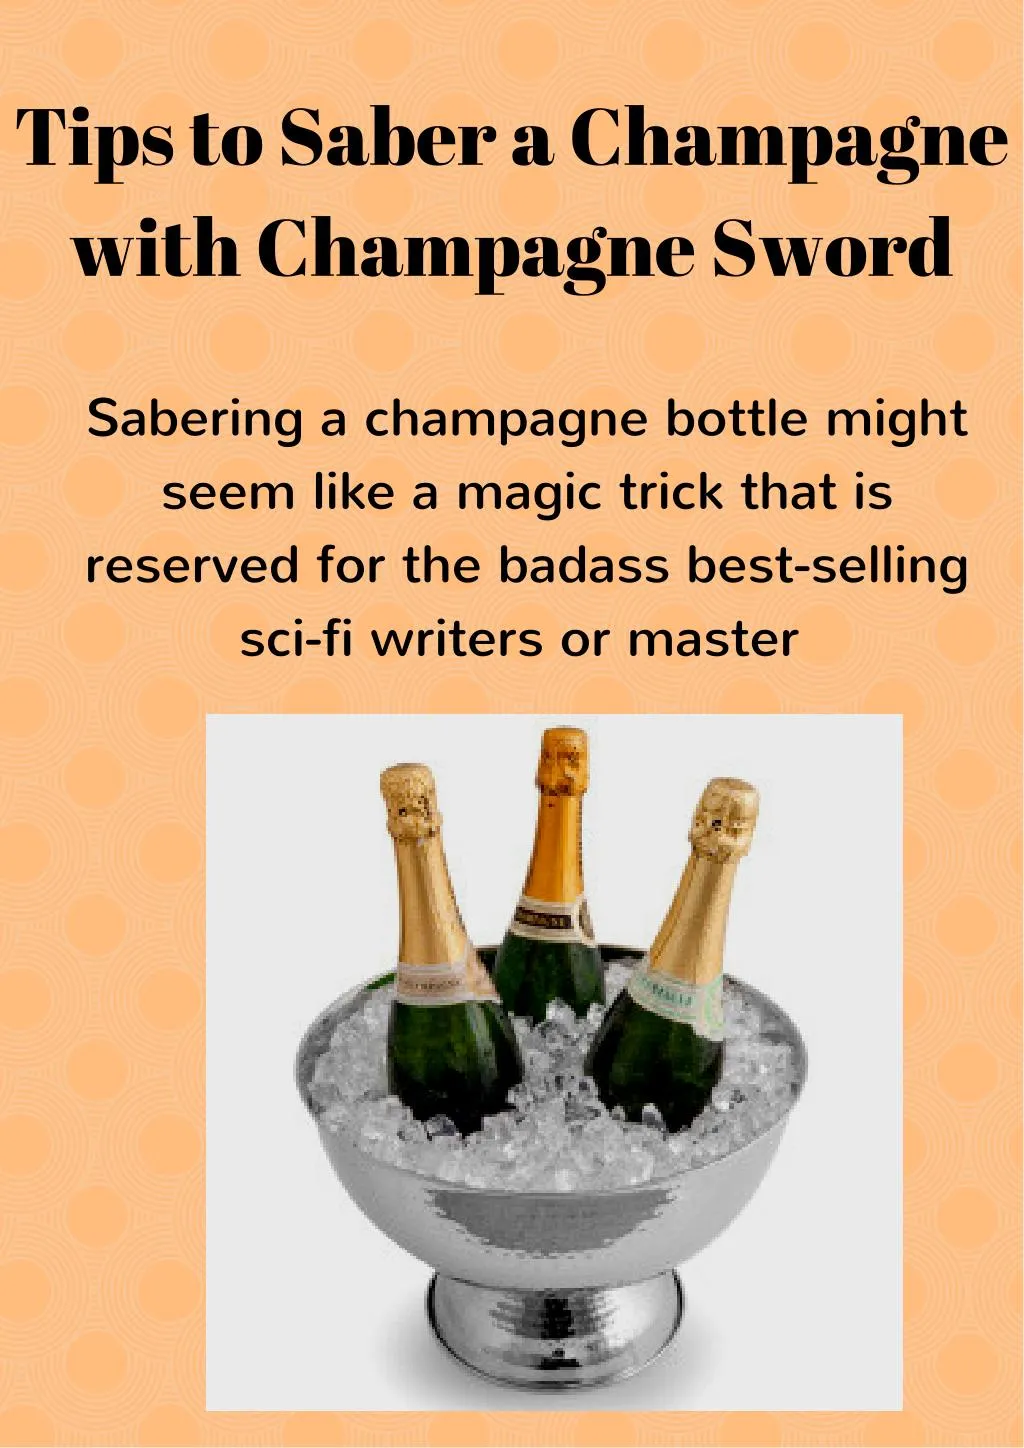 tips to saber a champagne with champagne sword